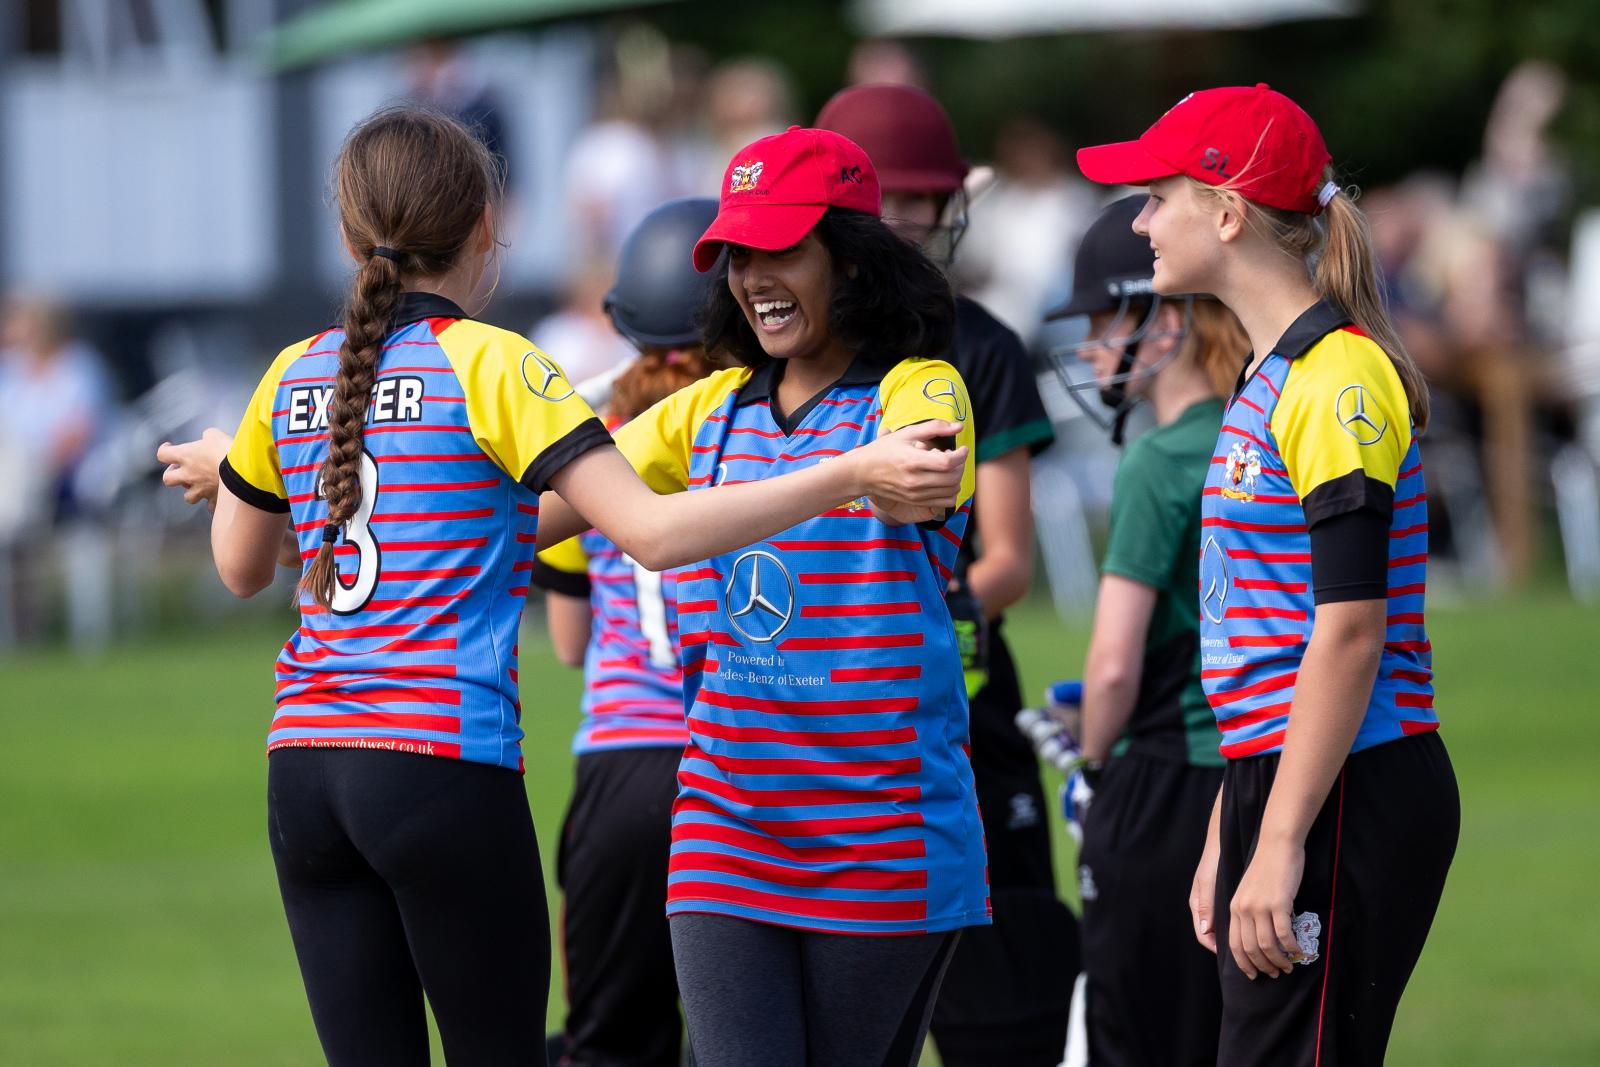 Girls' Cricket has grown rapidly in the past three years. Credit: Mark Lockett.